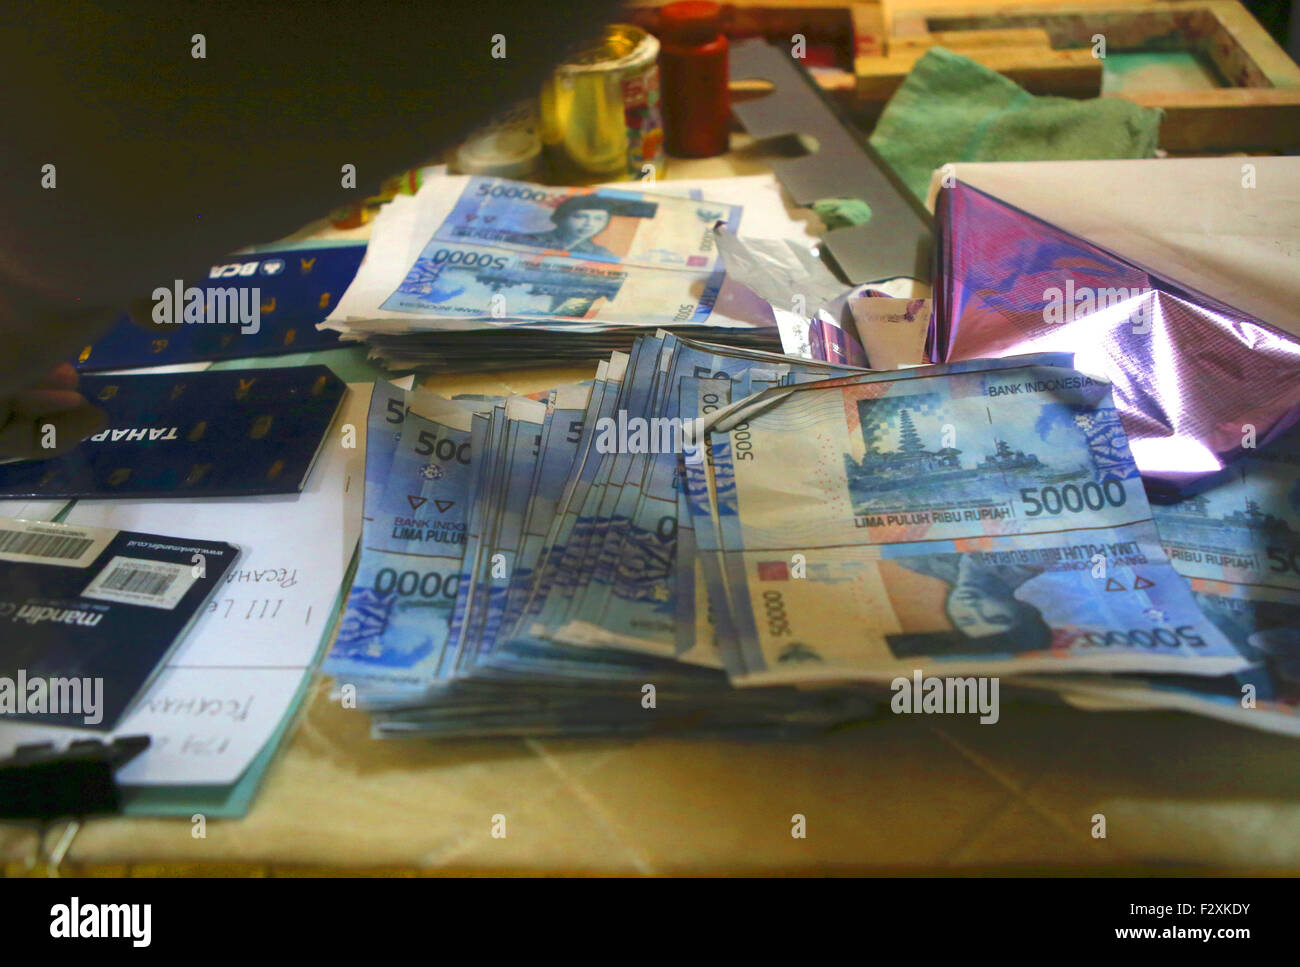 Evidence of counterfeit money seized from suspects © Denny Pohan/Alamy Live News Stock Photo